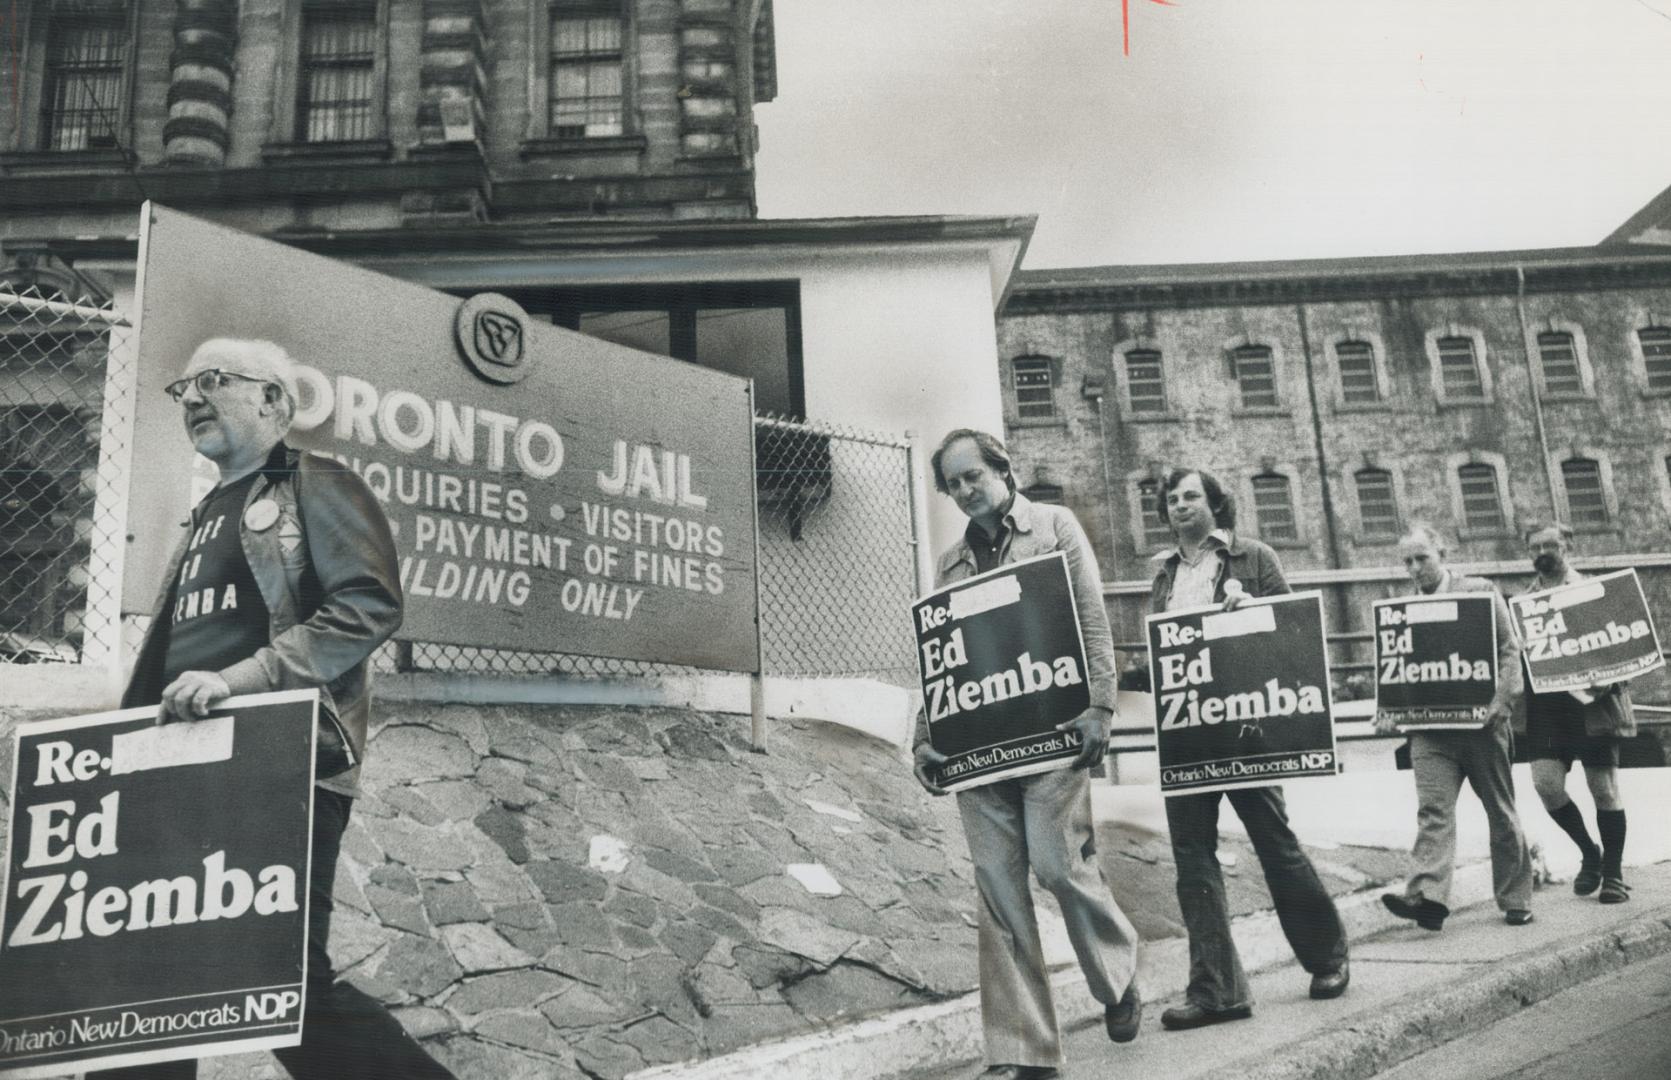 An early-morning protest against the jailing of MPP Ed Ziemba in Toronto (Don) Jail is led today by his brother, Joe (right), and Ivan Brown. He was s(...)